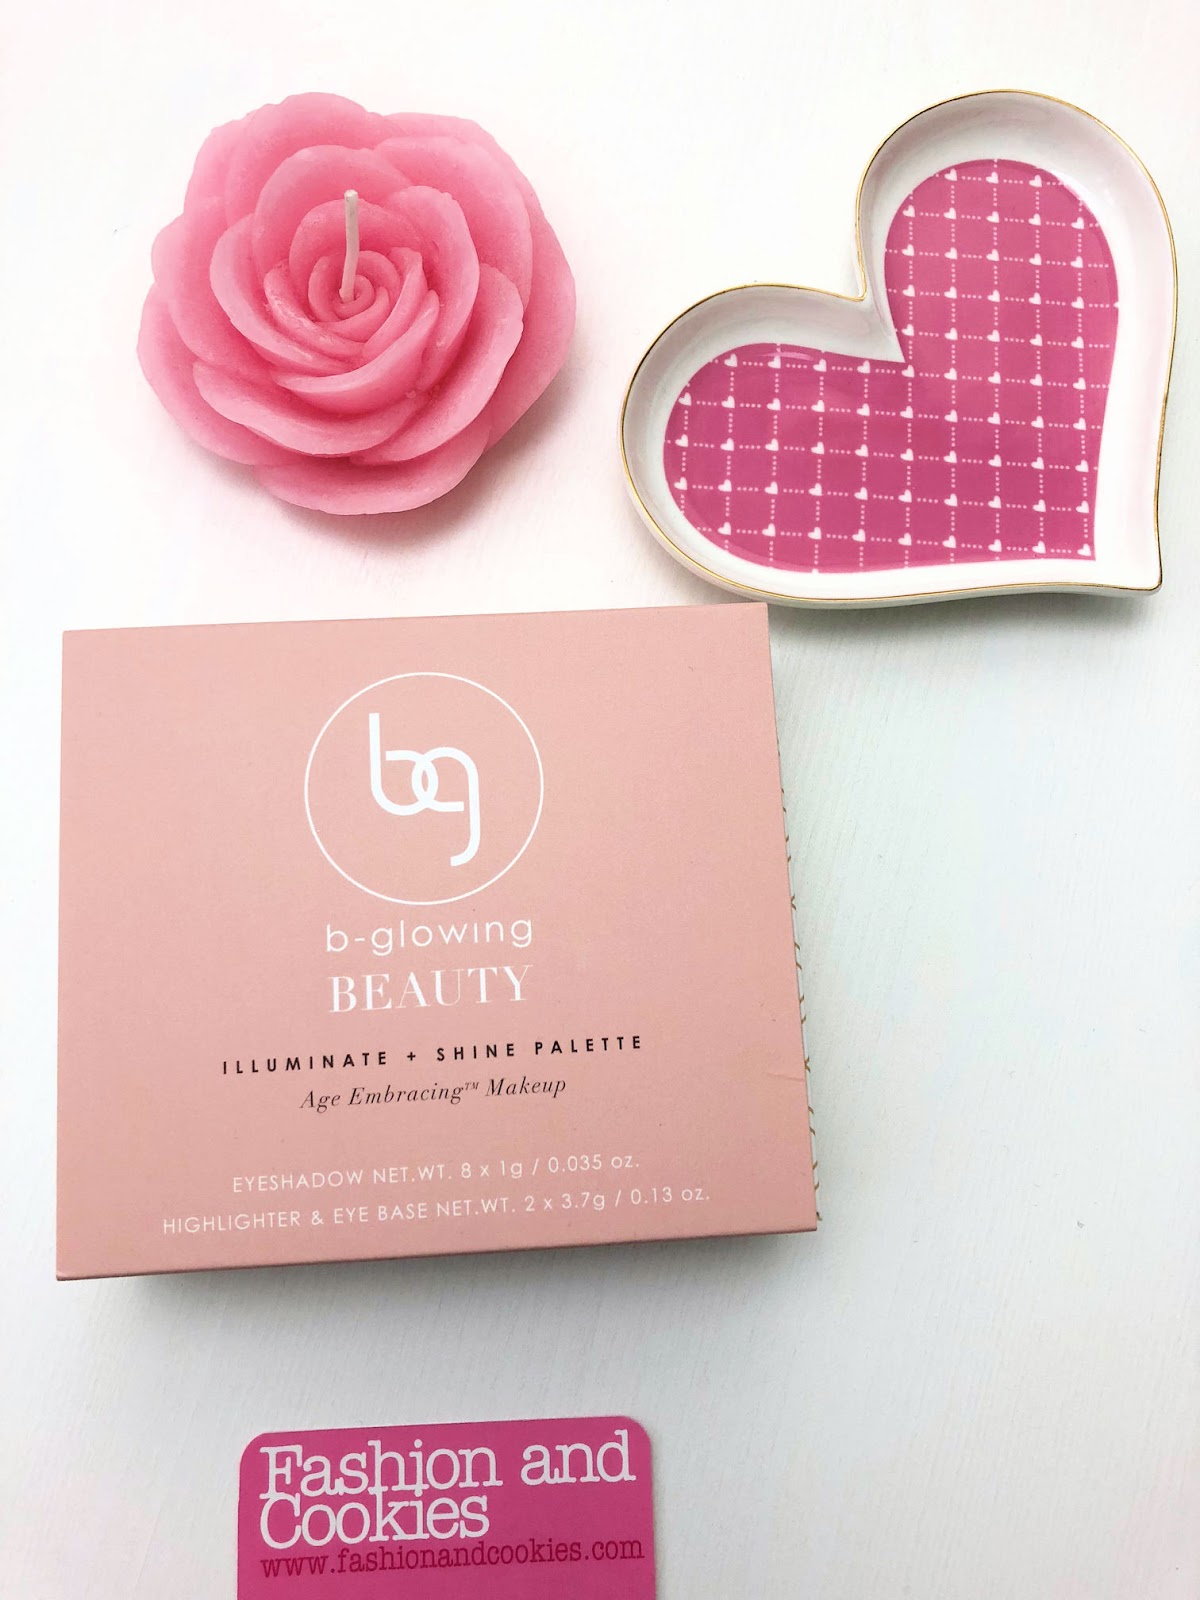 Best makeup for mature women: b-glowing Illuminate + Shine Palette on Fashion and Cookies beauty blog, beauty blogger